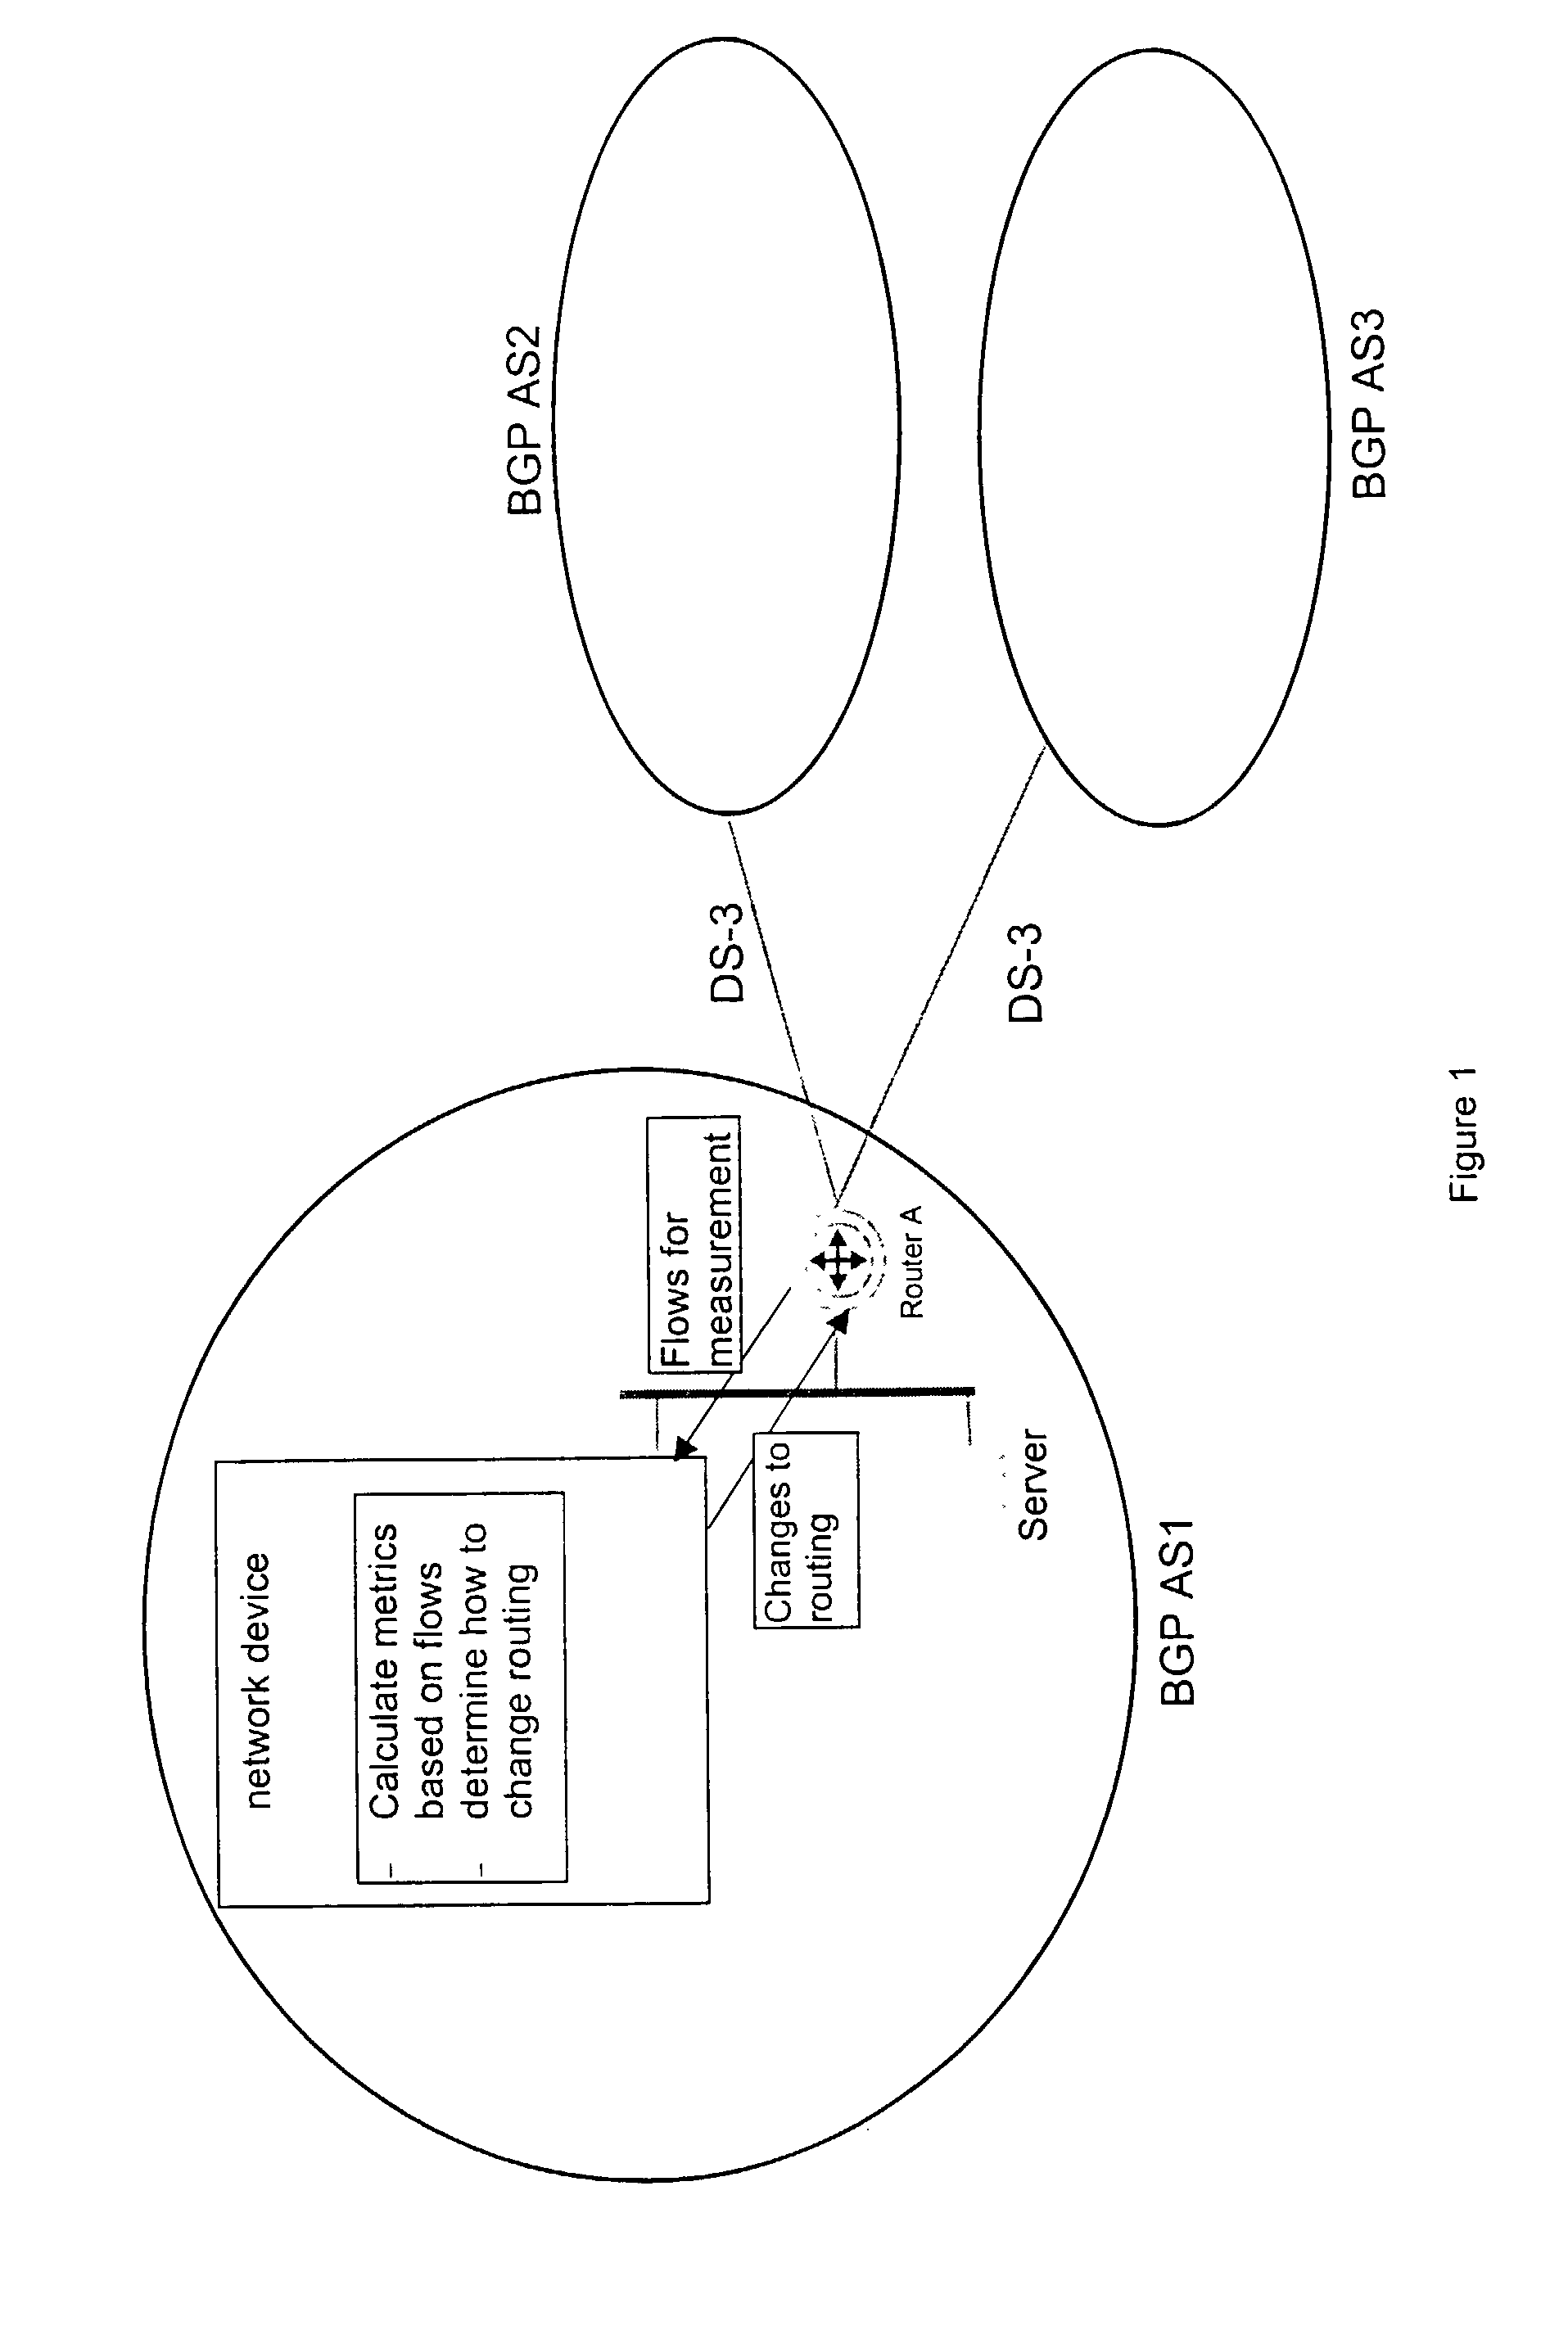 Method and apparatus for the assessment and optimization of network traffic